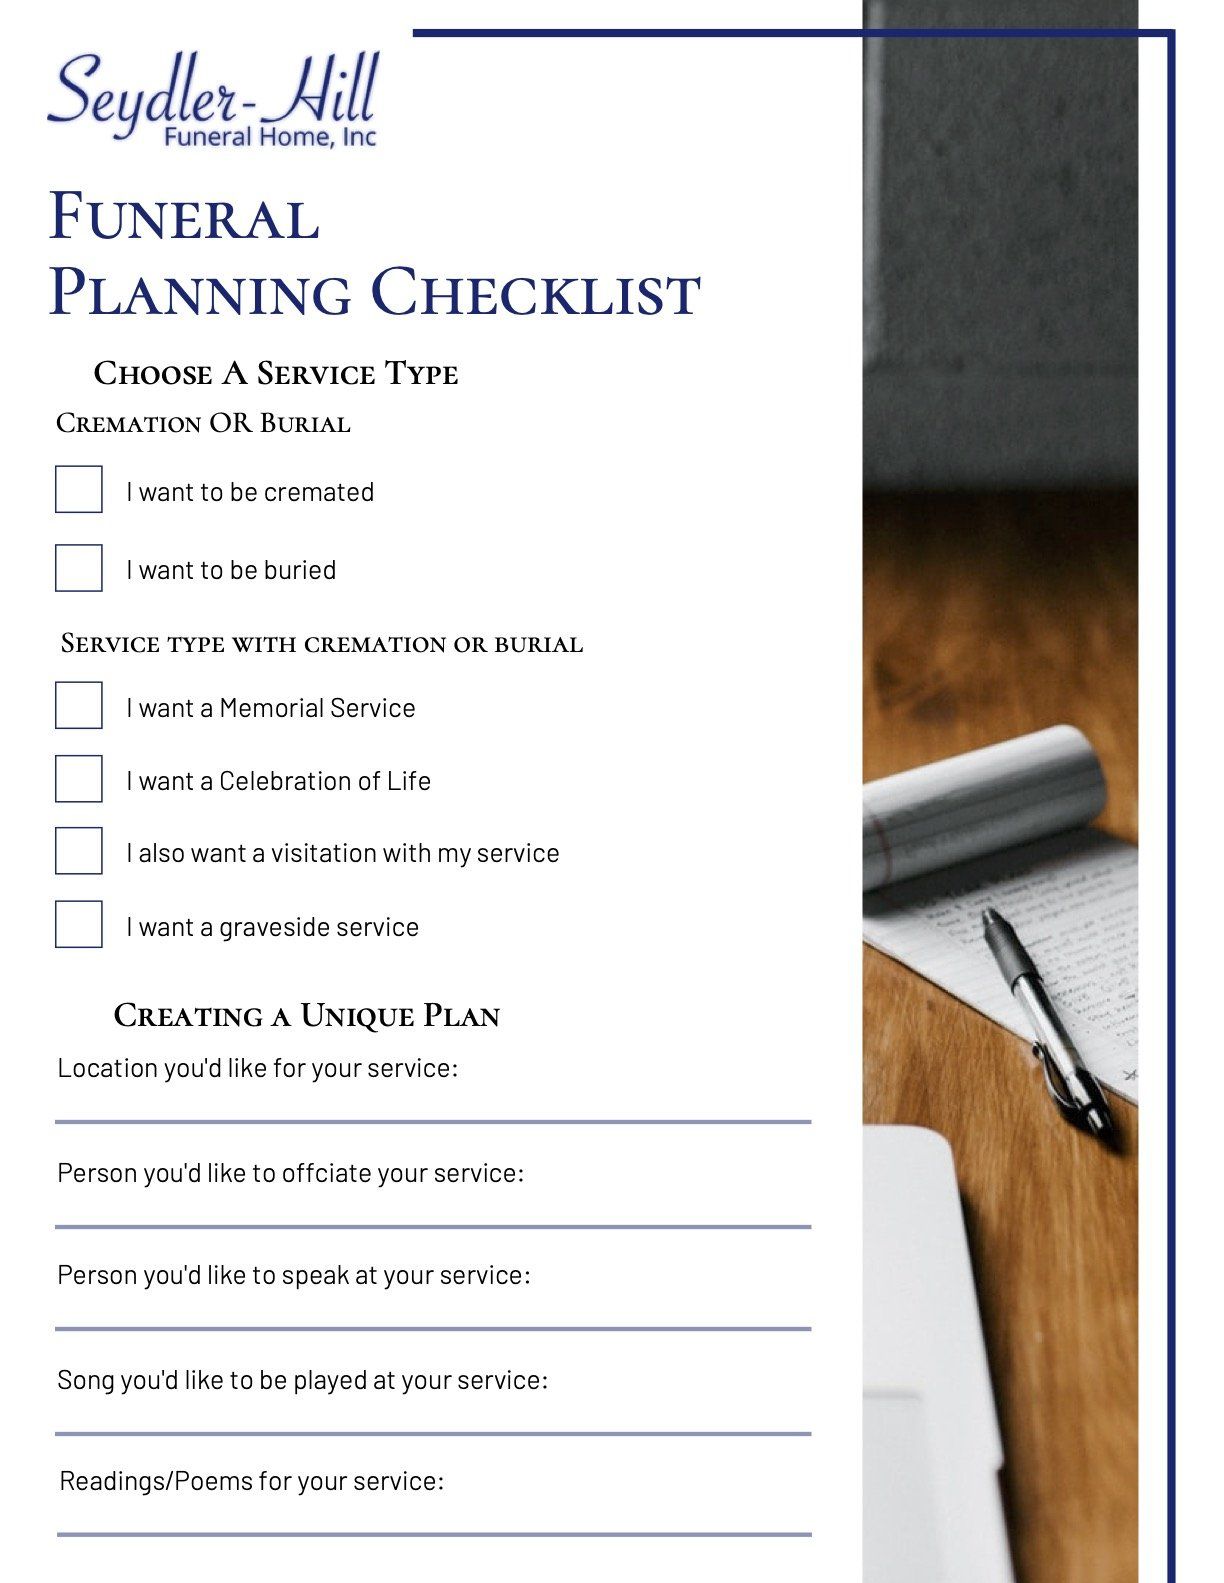 Funeral Planning Checklist Template 4259